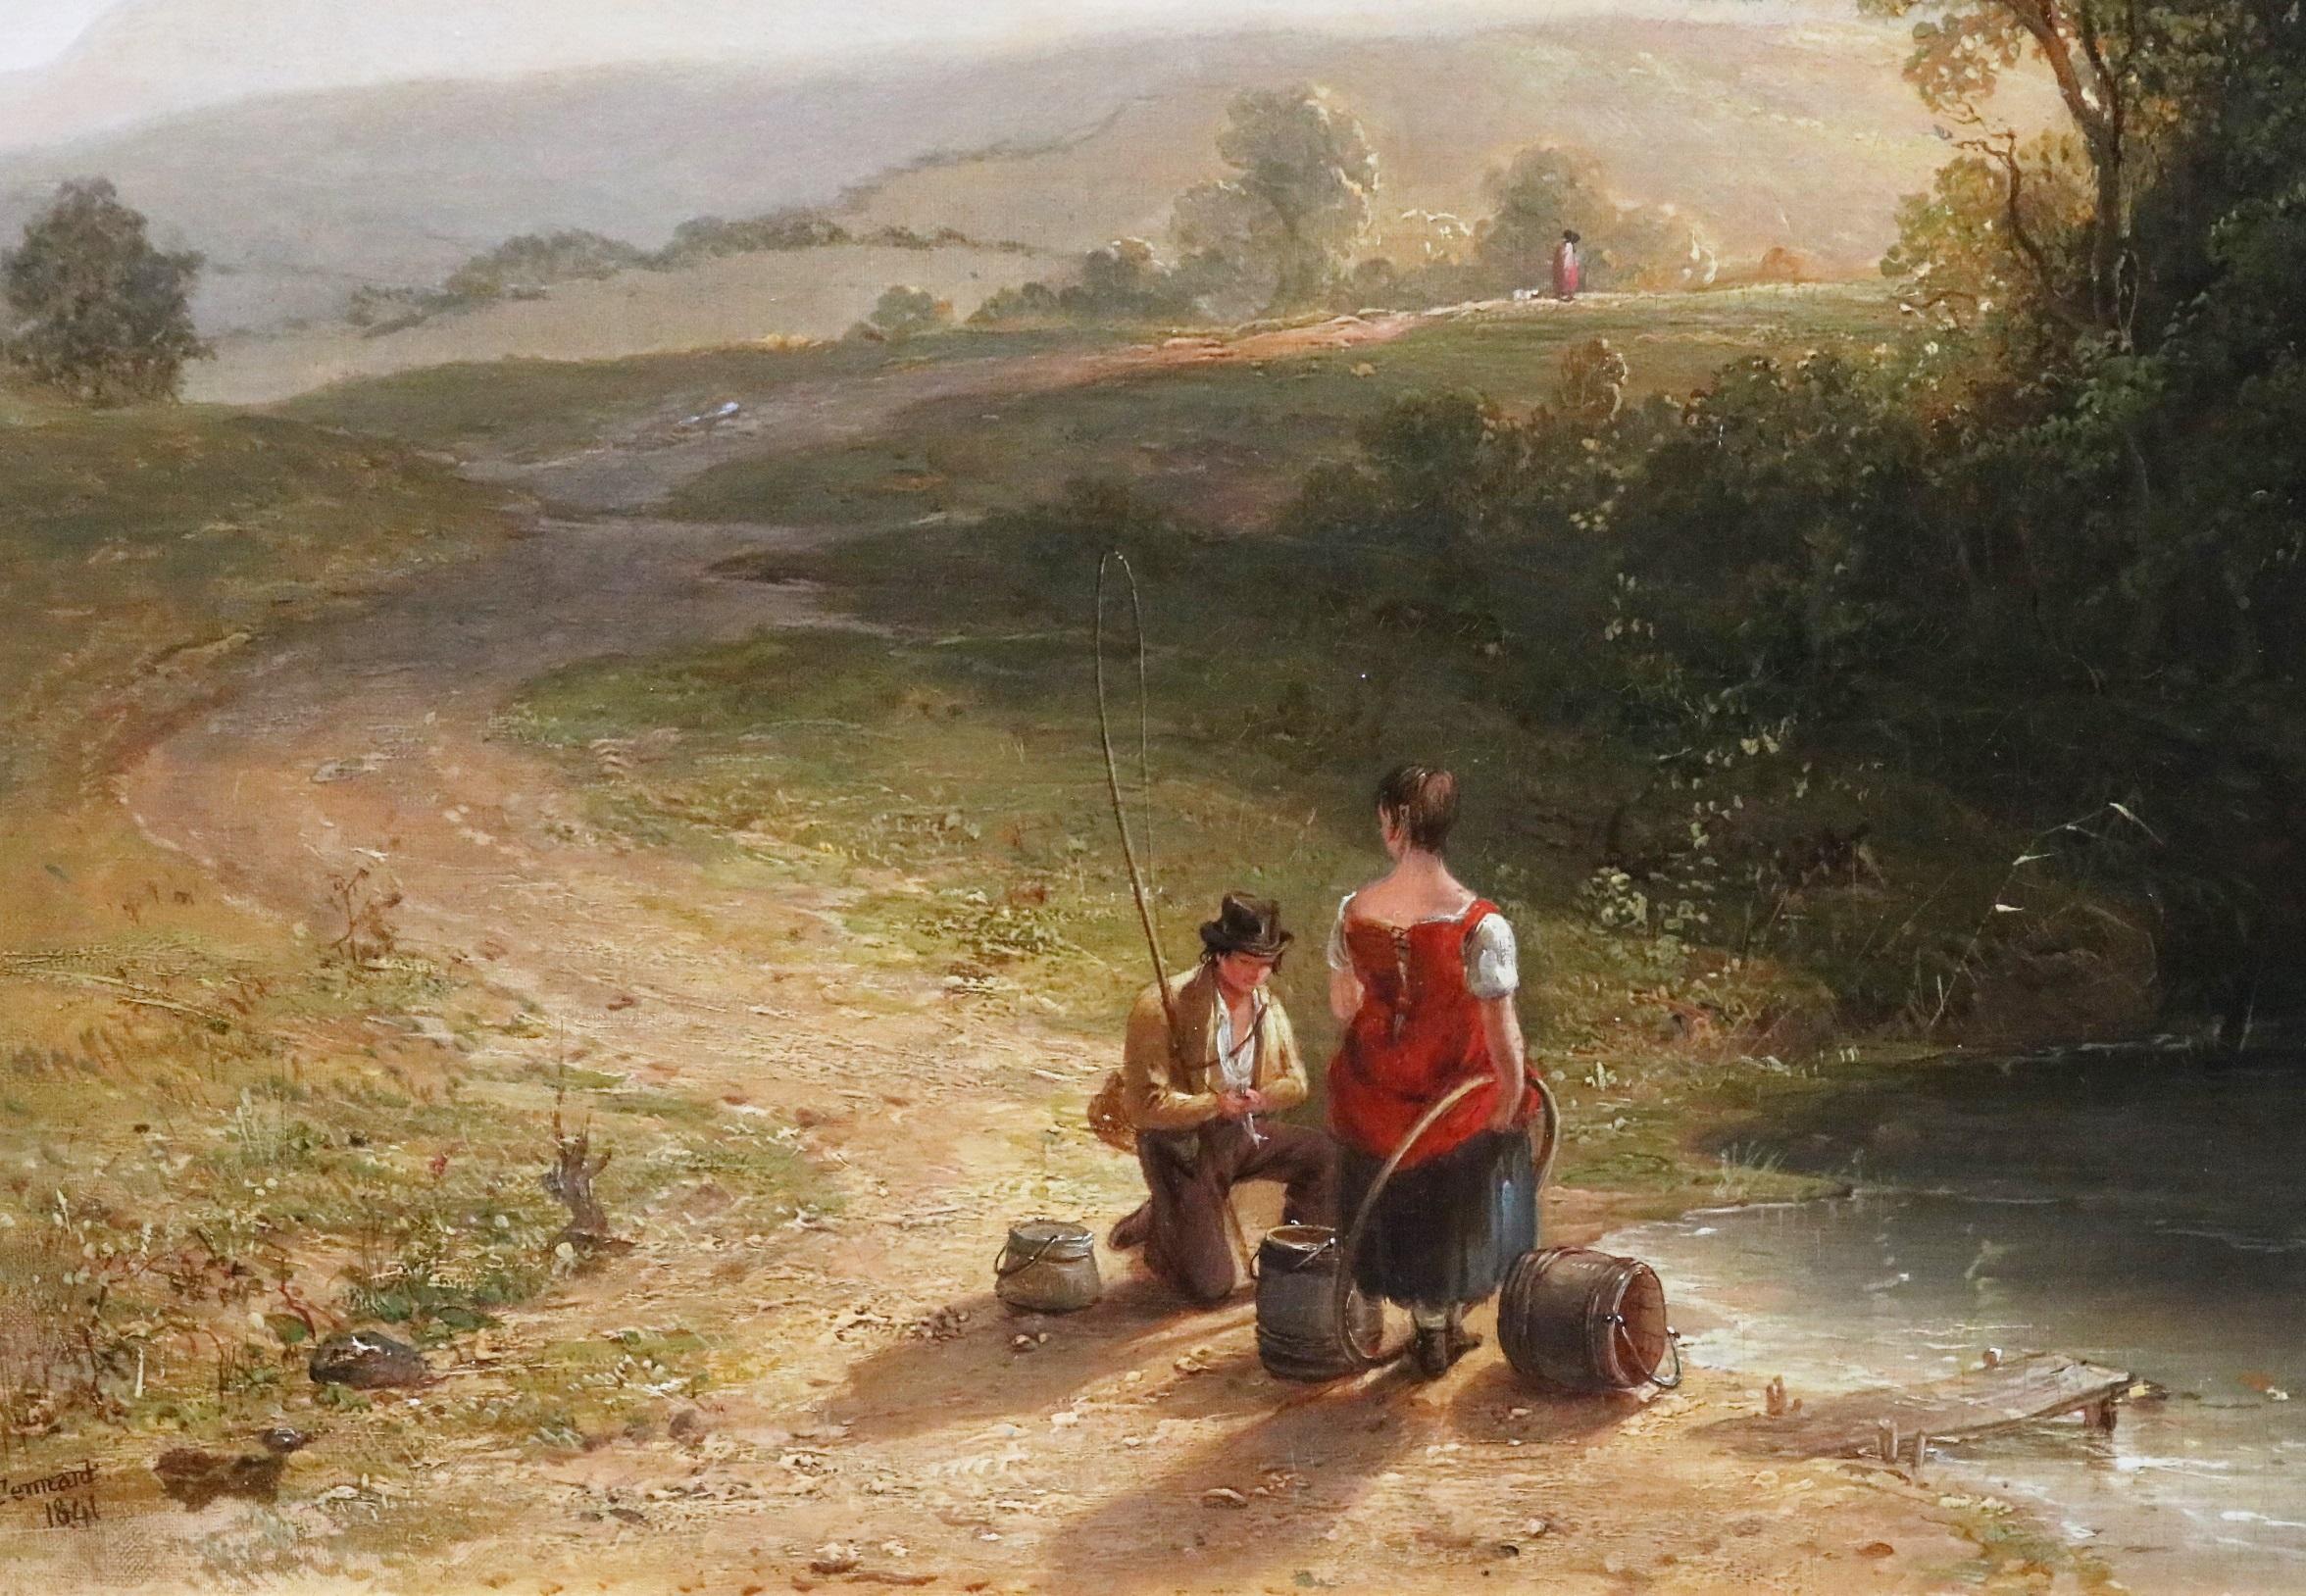 ‘River Scene near Scarborough’ by John Frederick Tennant R.B.A. (1796-1872). The painting – which depicts a couple by a brook fishing at sunset in North Yorkshire – is signed by the artist and dated 1841 in which year it was exhibited at the Royal